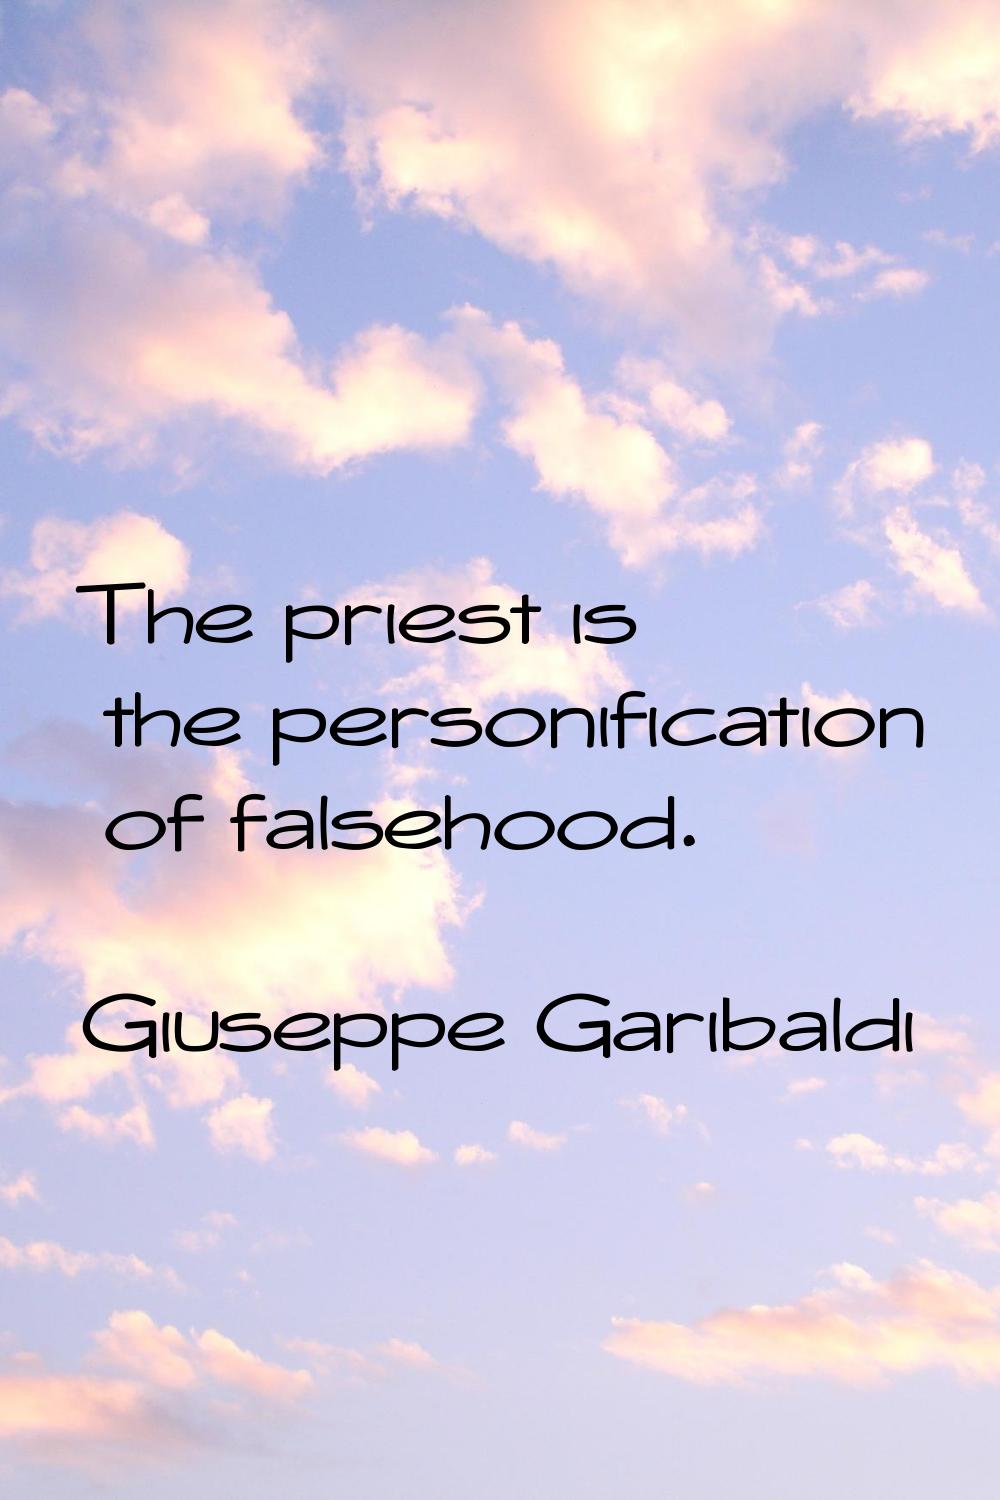 The priest is the personification of falsehood.